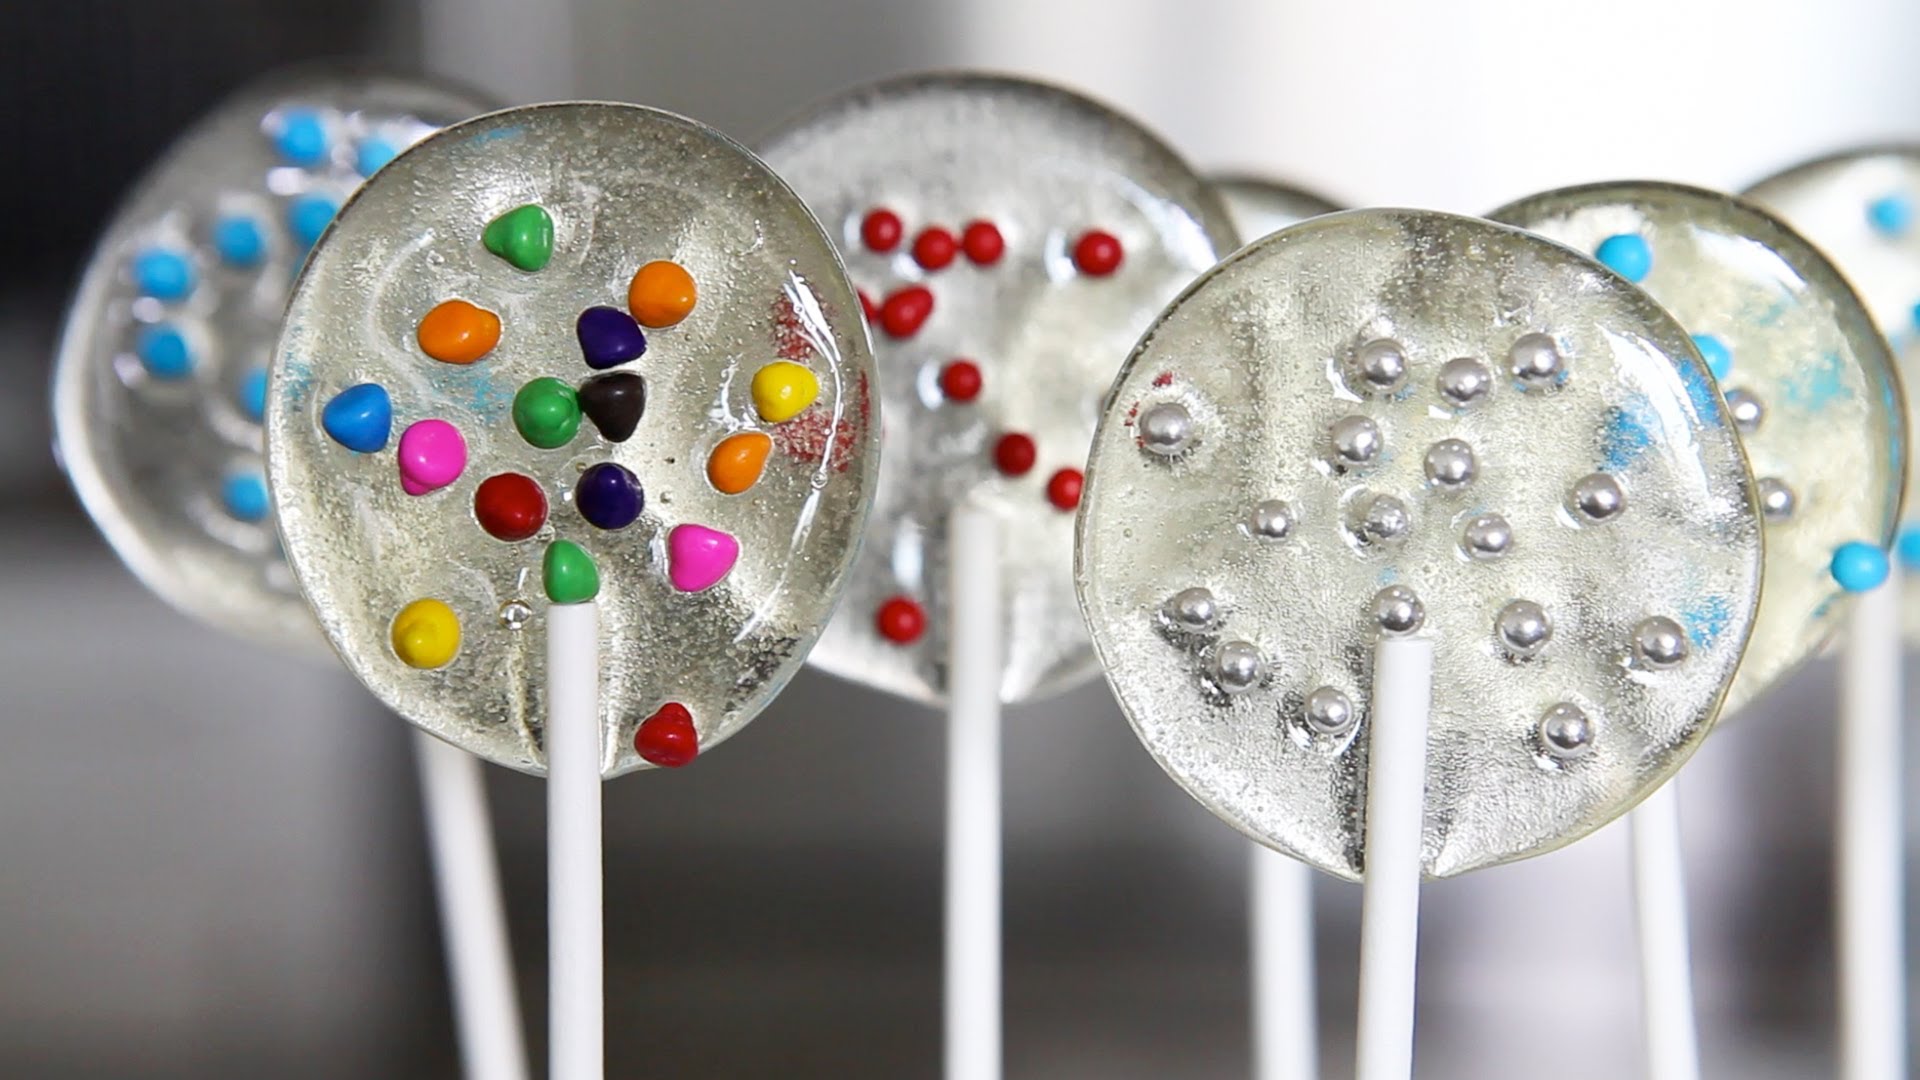 How To Make Homemade Lollipops - Afternoon Baking With Grandma